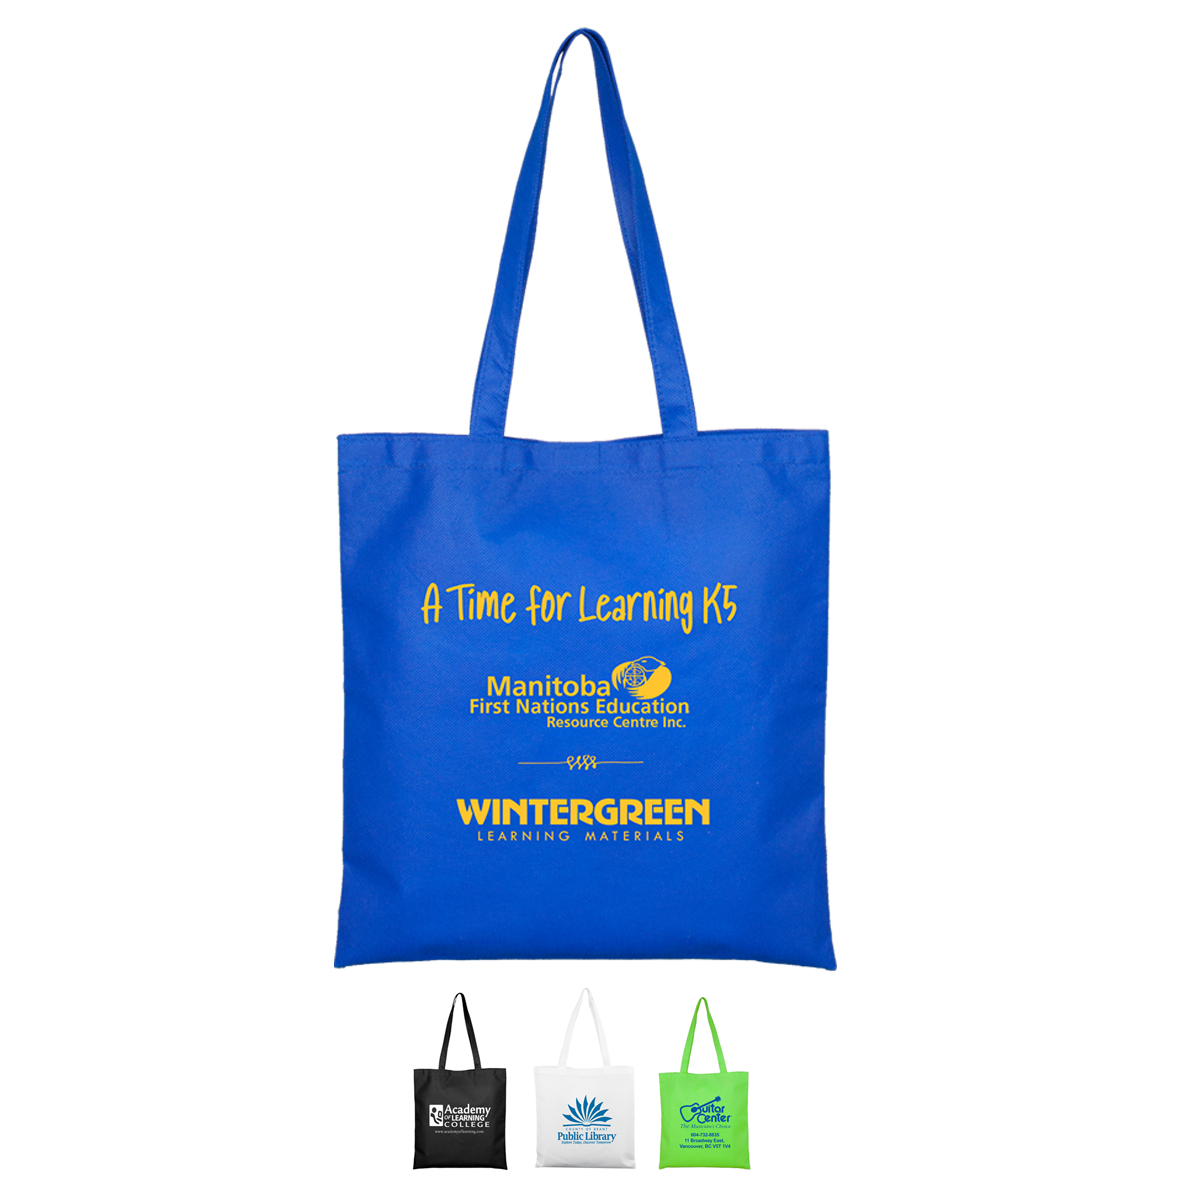 15”W x 16”H - “Catalina” Day Tote & Shopping Bag with Hook and loop Fastener Closure